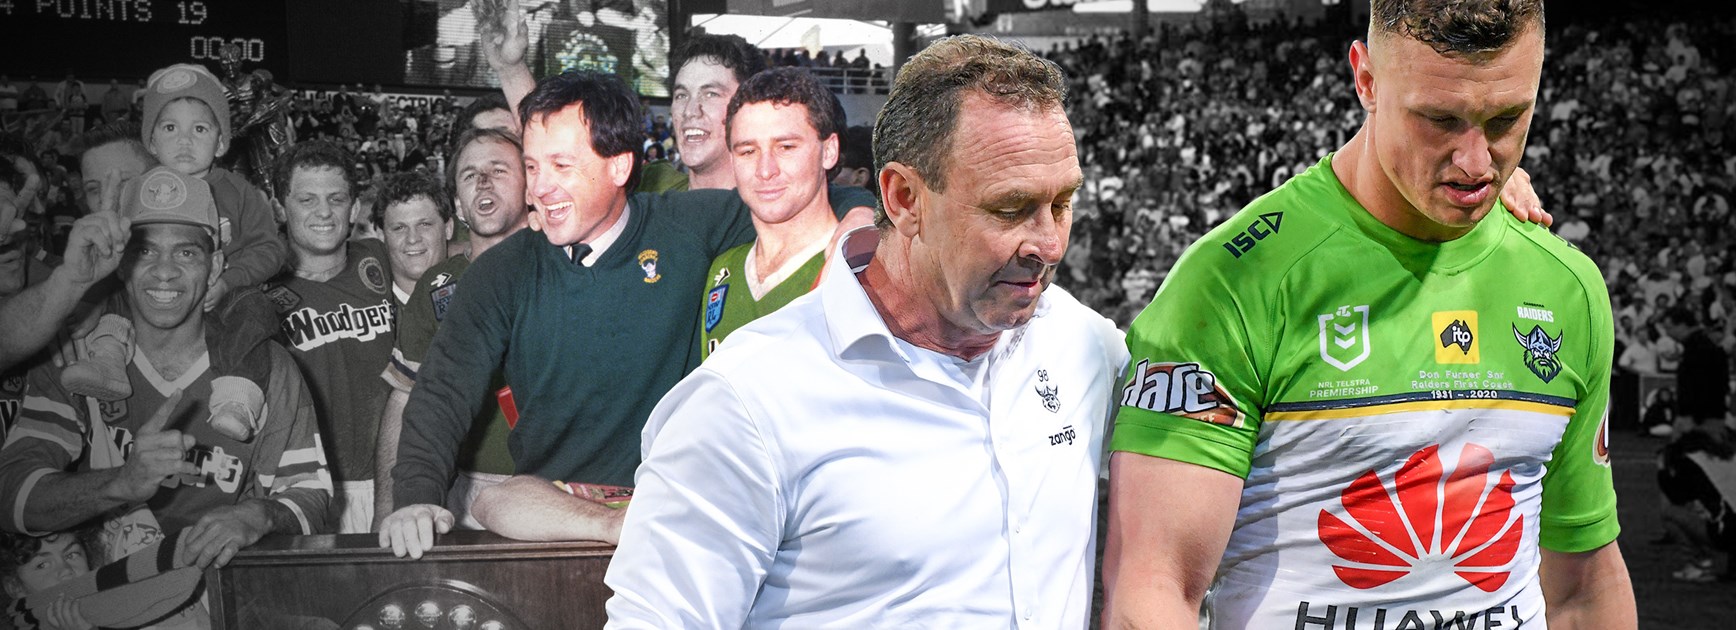 Raiders royalty: Stuart on verge of more Canberra history